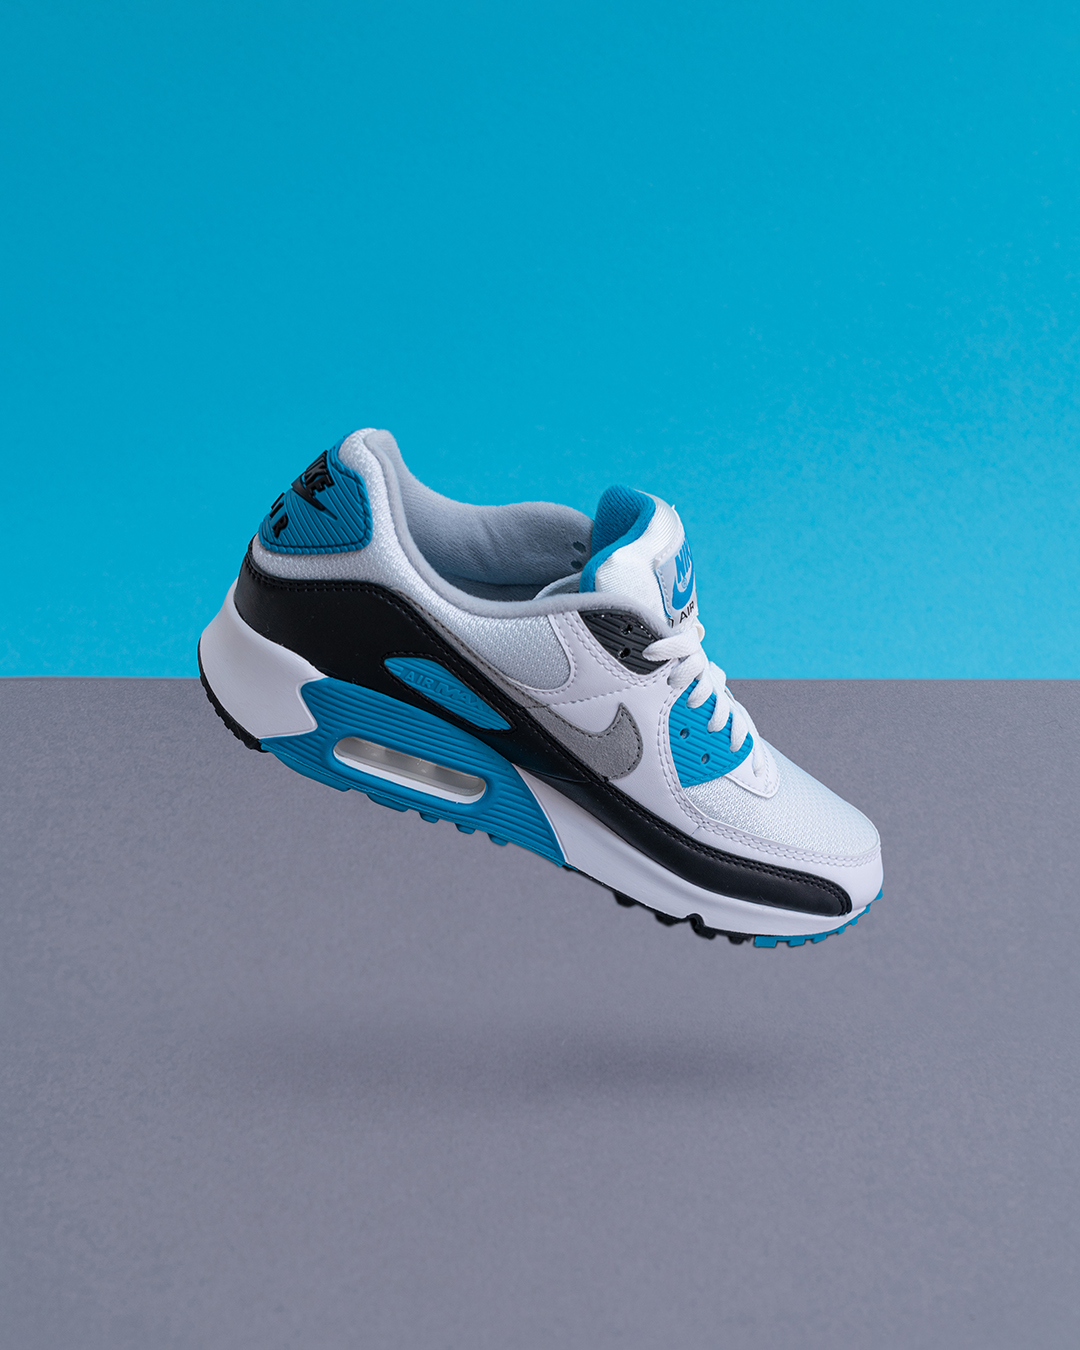 Nike Air Max90 | Product fotoshoot | Y.M. Klooster Fotografie